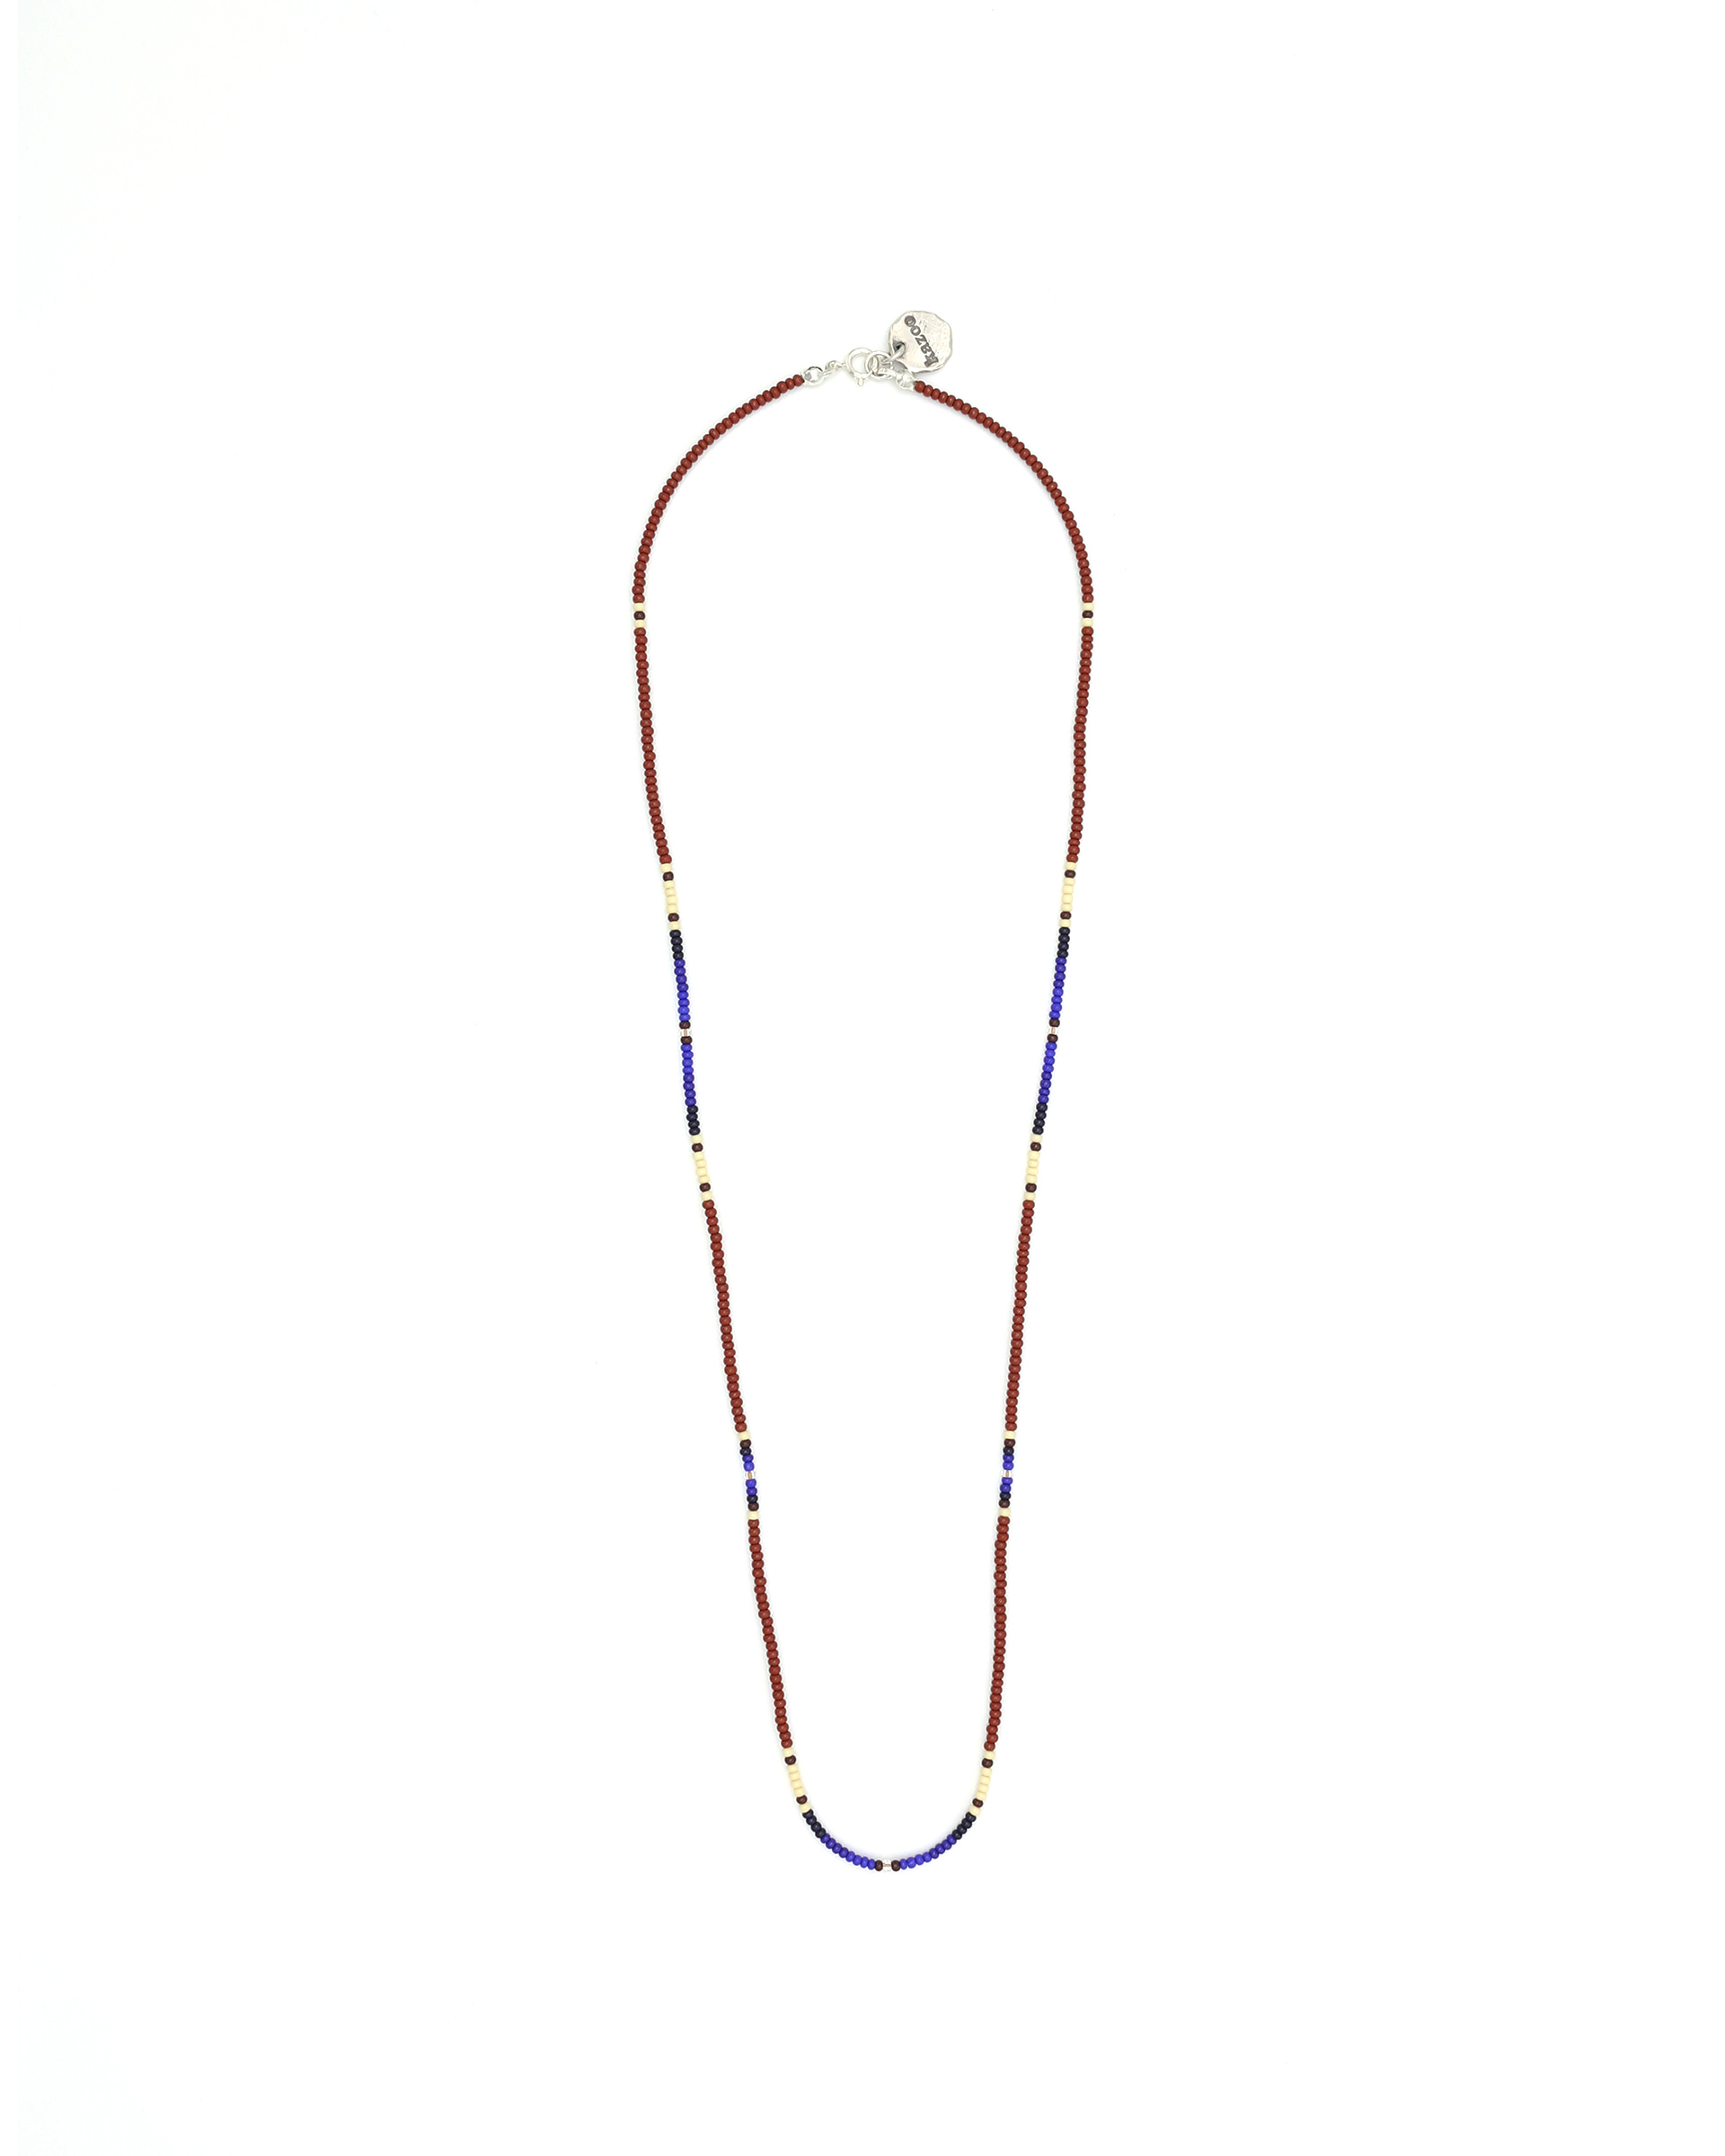 NAVY - MAROON / BEADS NECKLACE